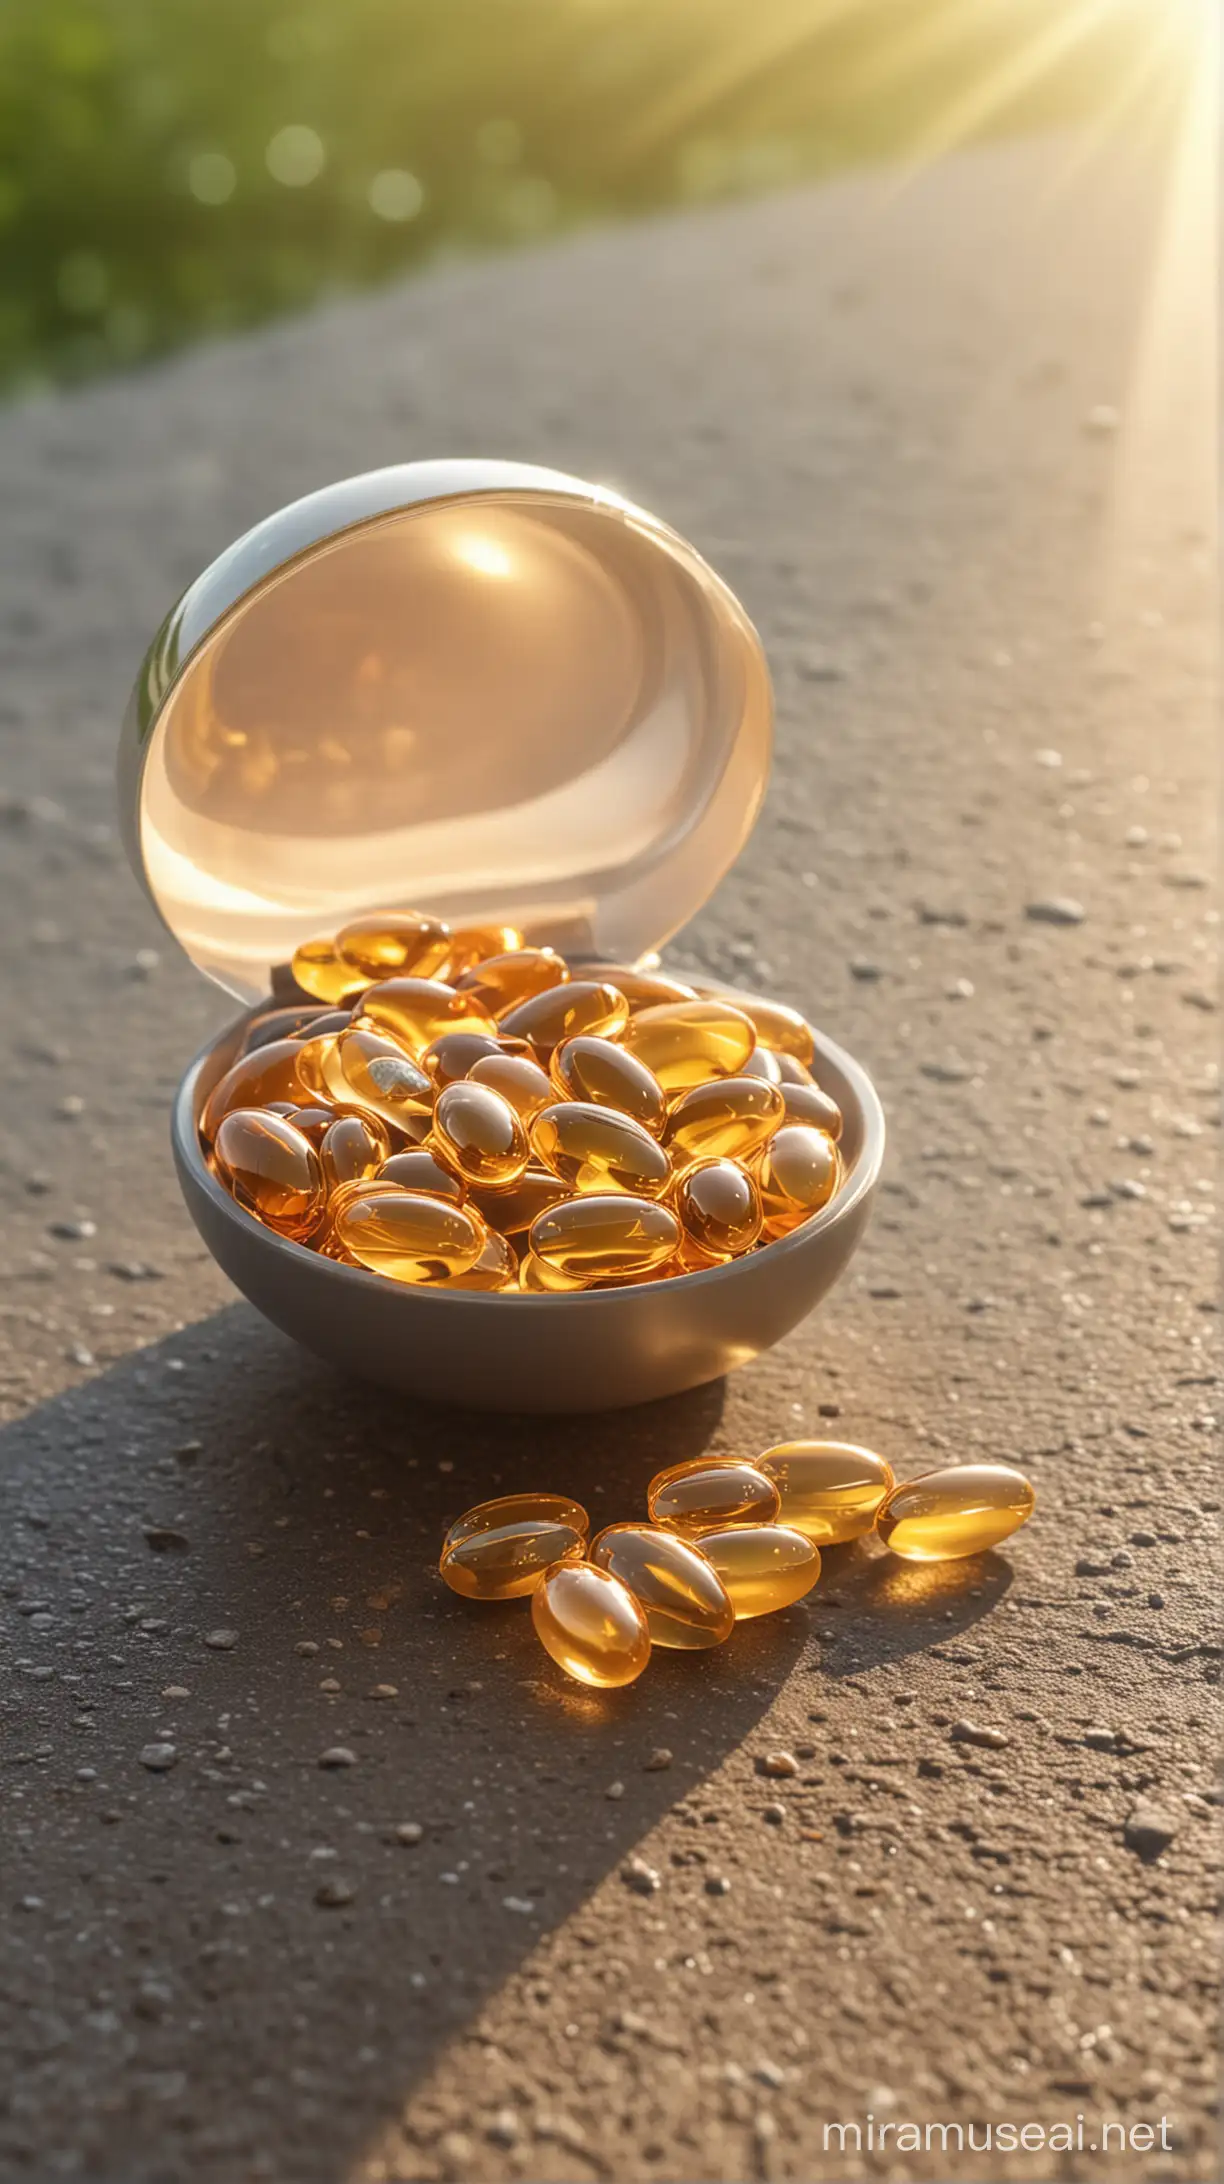 Omega 3 Capsule on Table Natural Background with Sunlight Effect in 4K HDR Morning Time Weather